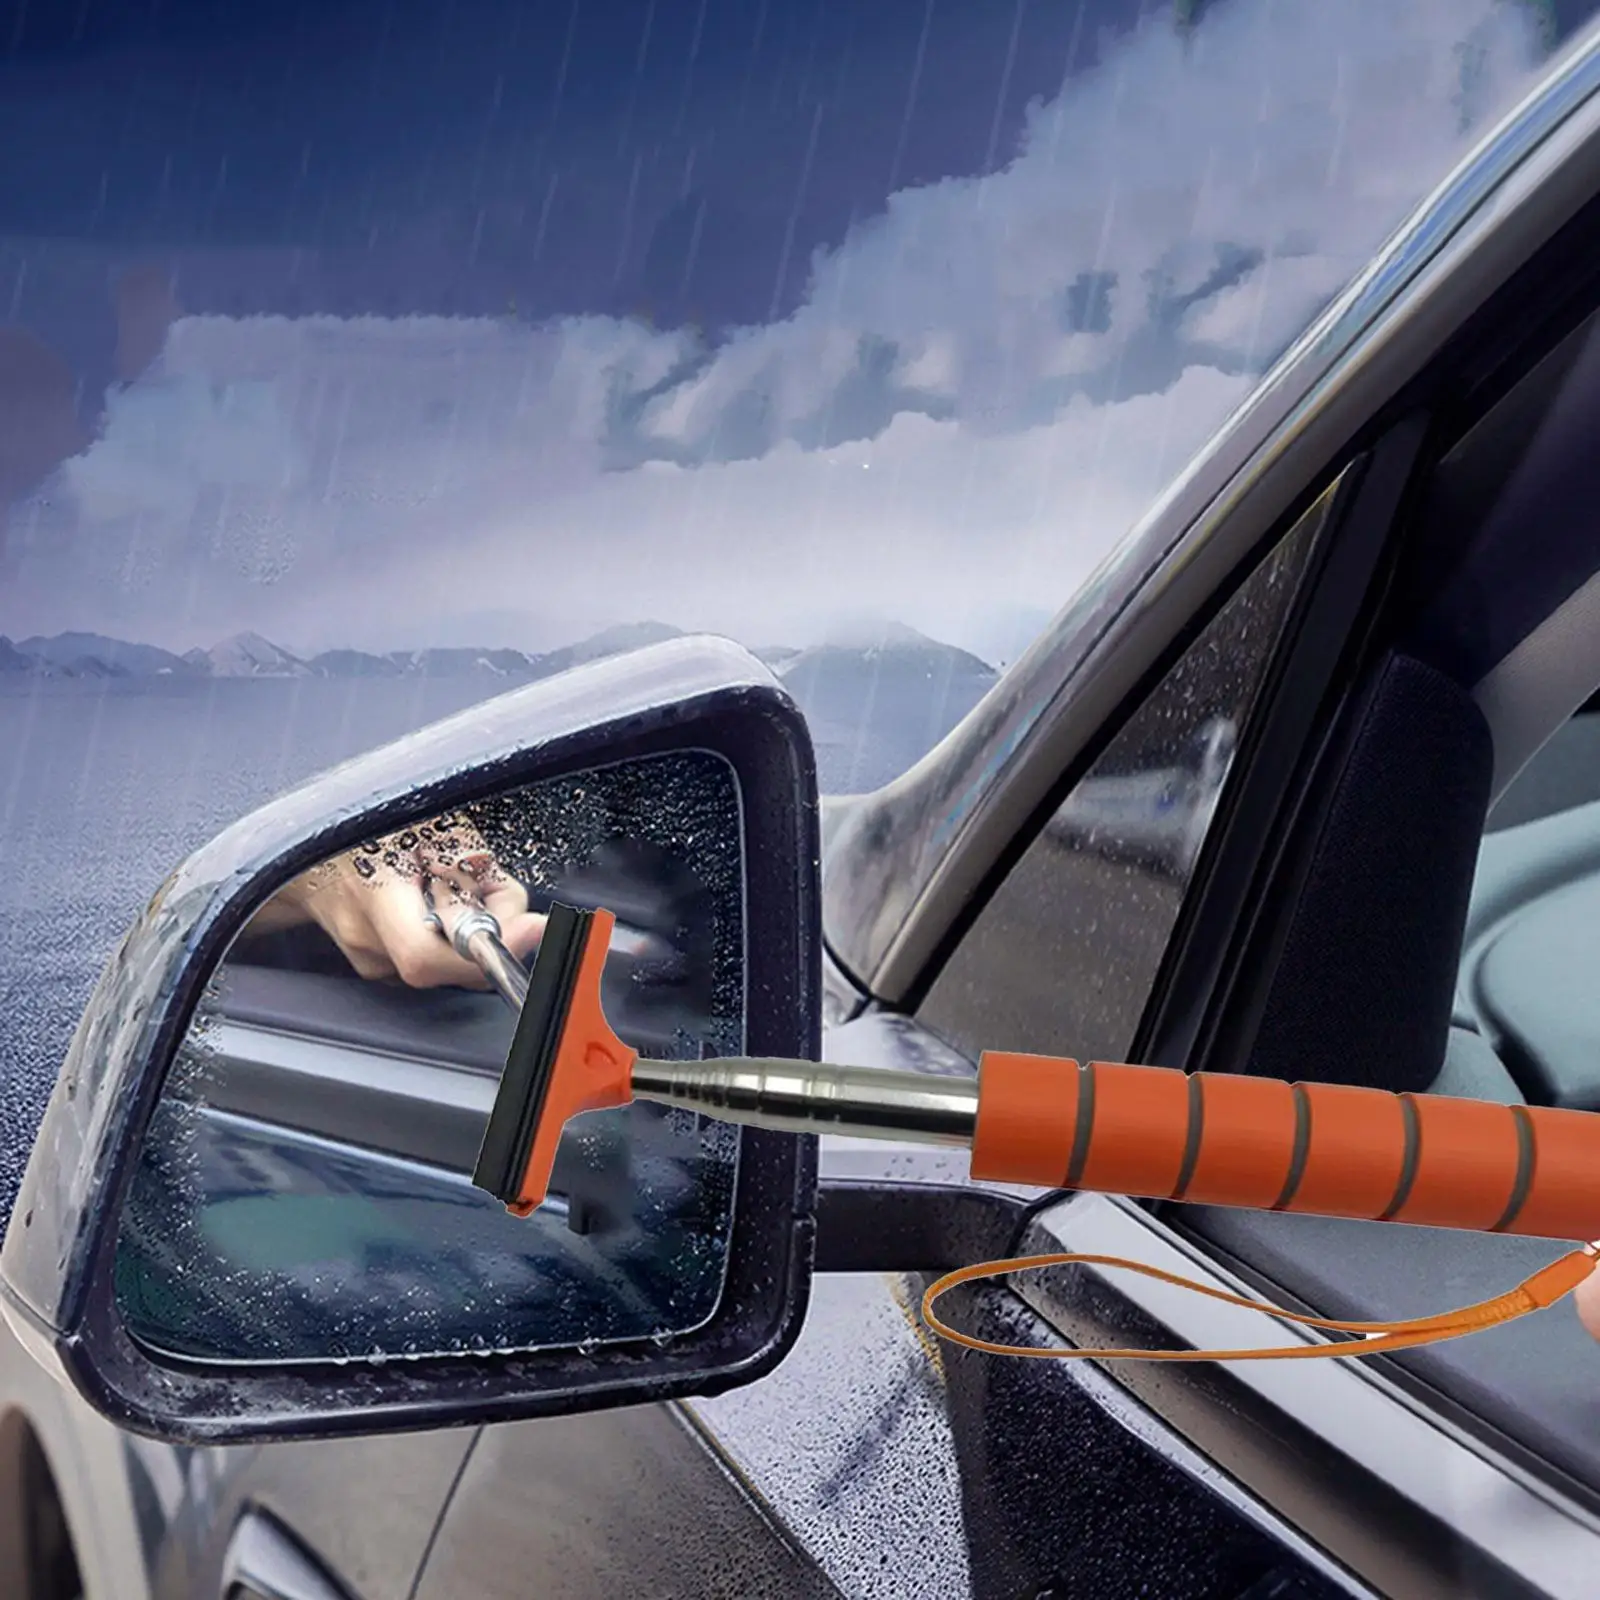 Car Rearview Mirror Wiper Portable for Rainy Foggy Weather Snow Brush Shovel